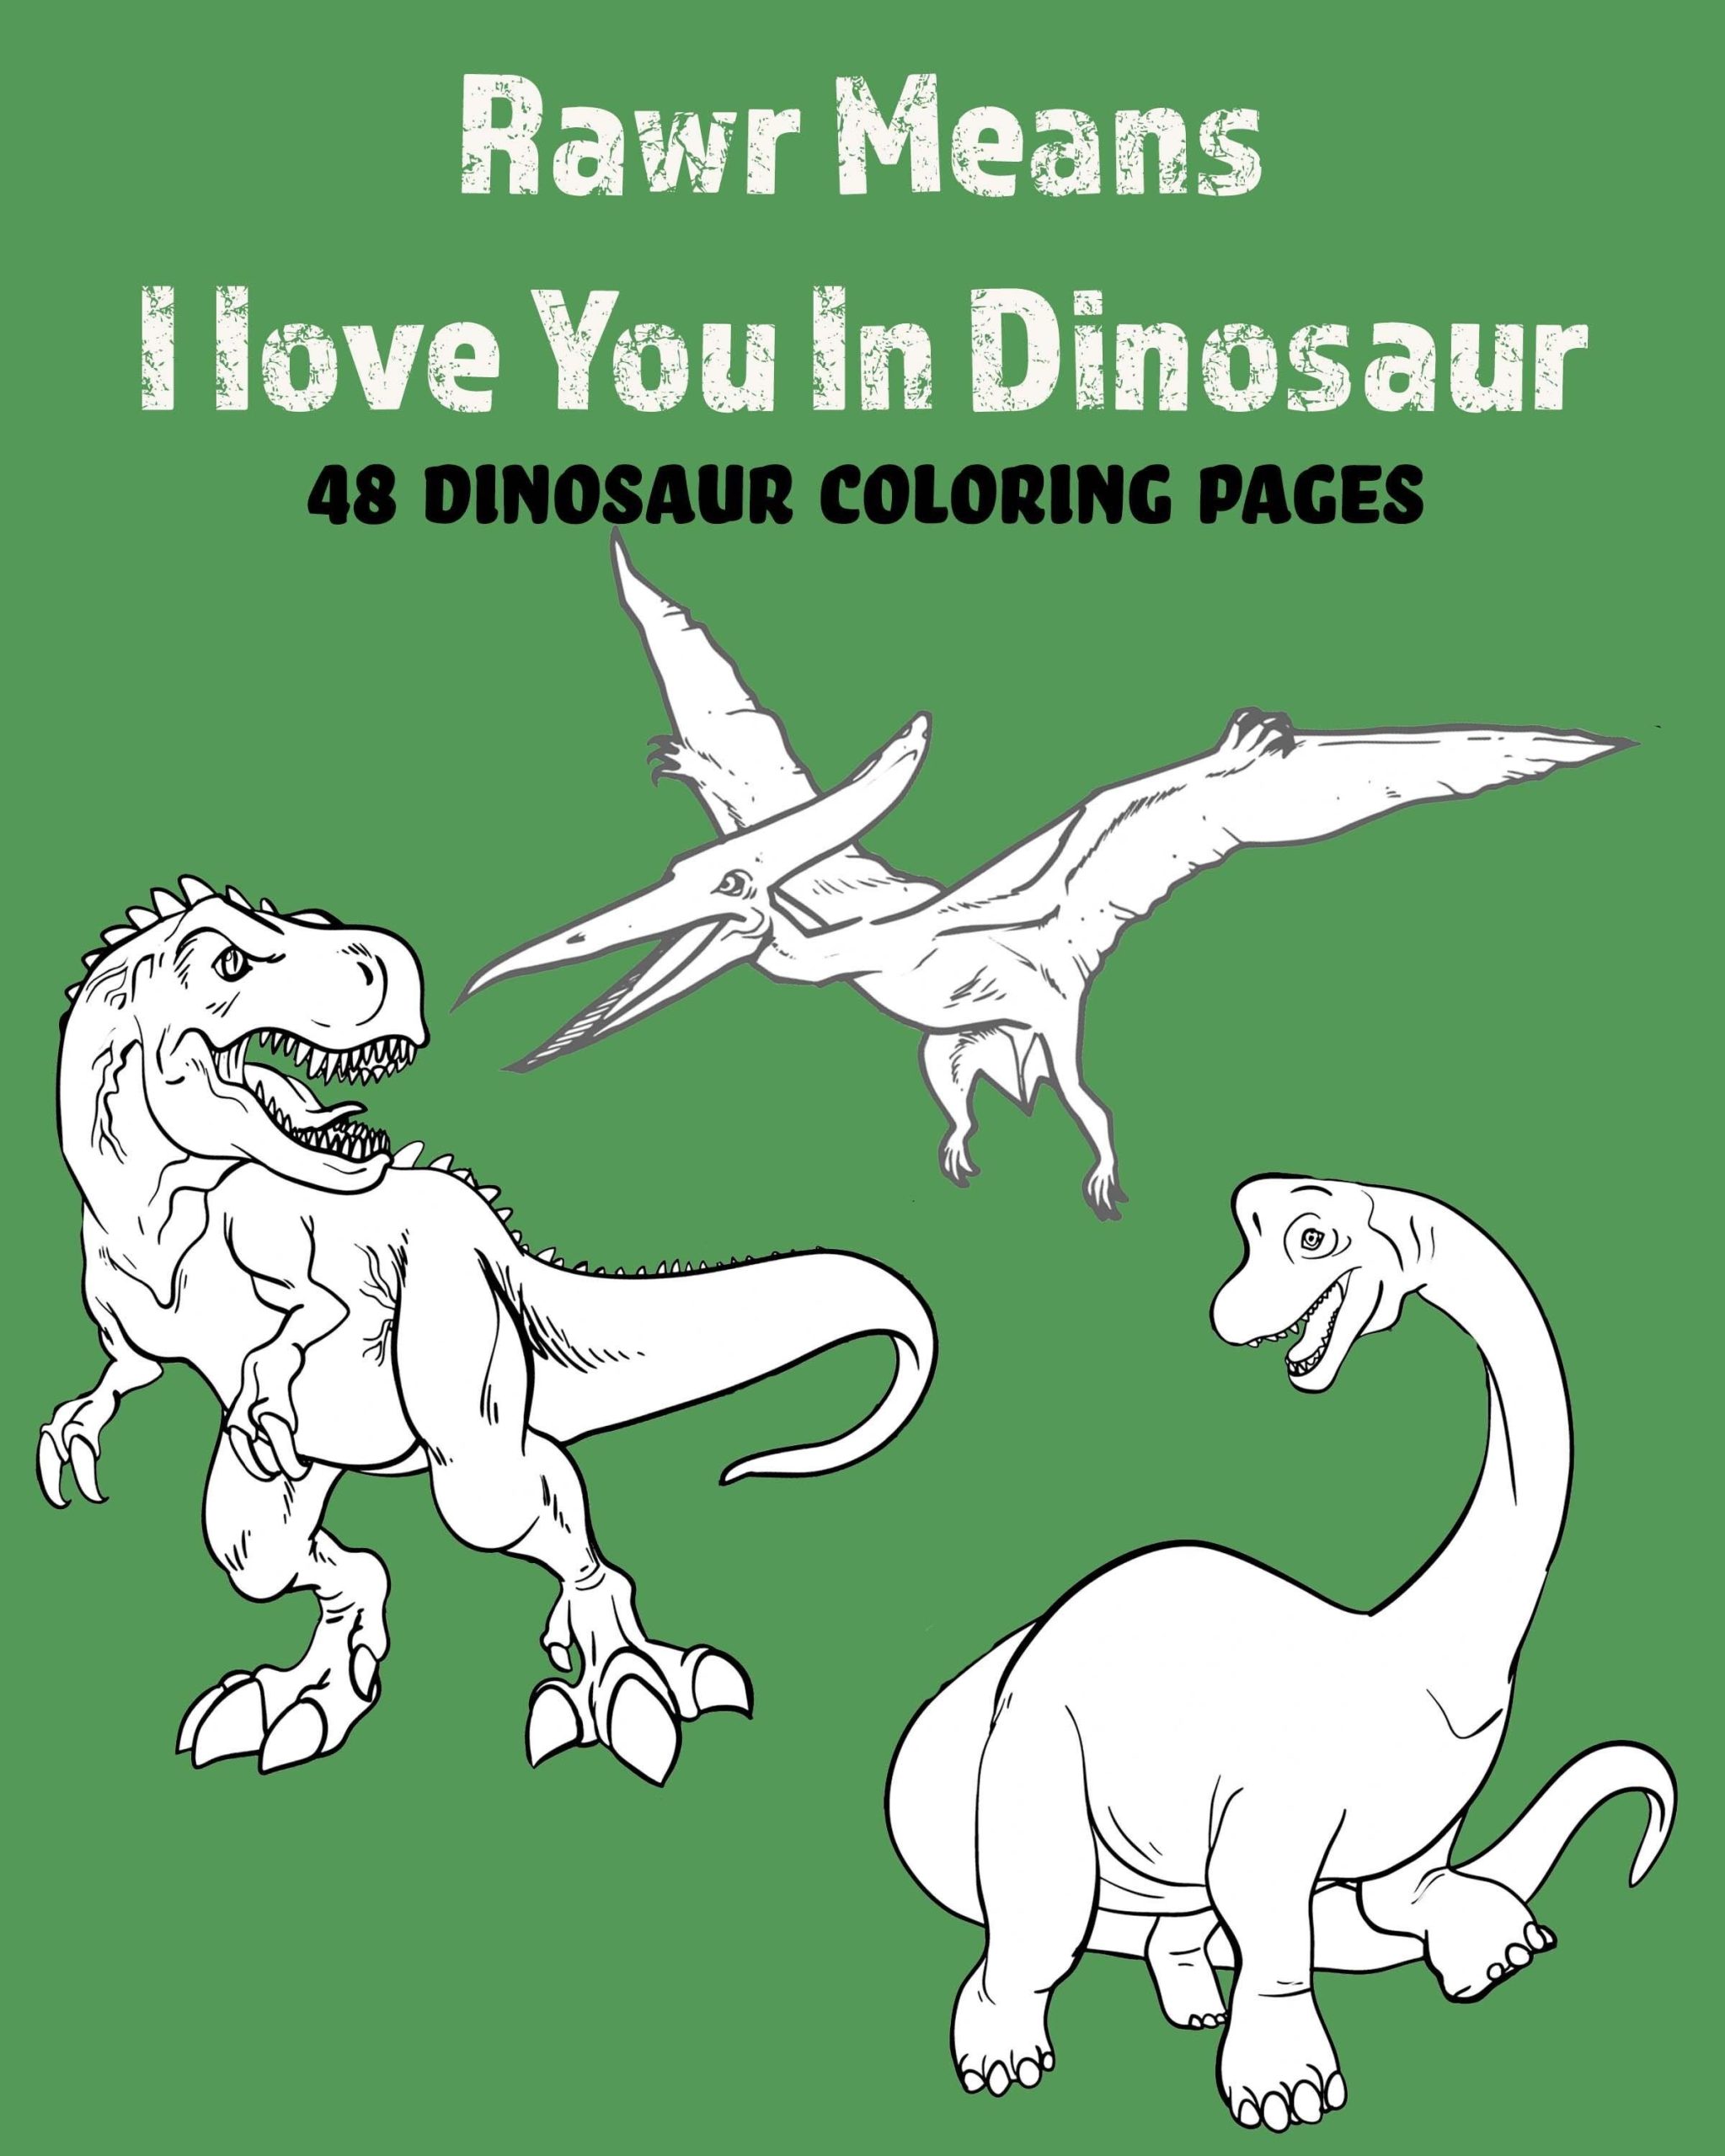 RARW Means I Love You In Dinosaur Digital Coloring Book - 48 Dinosaur Coloring Pages